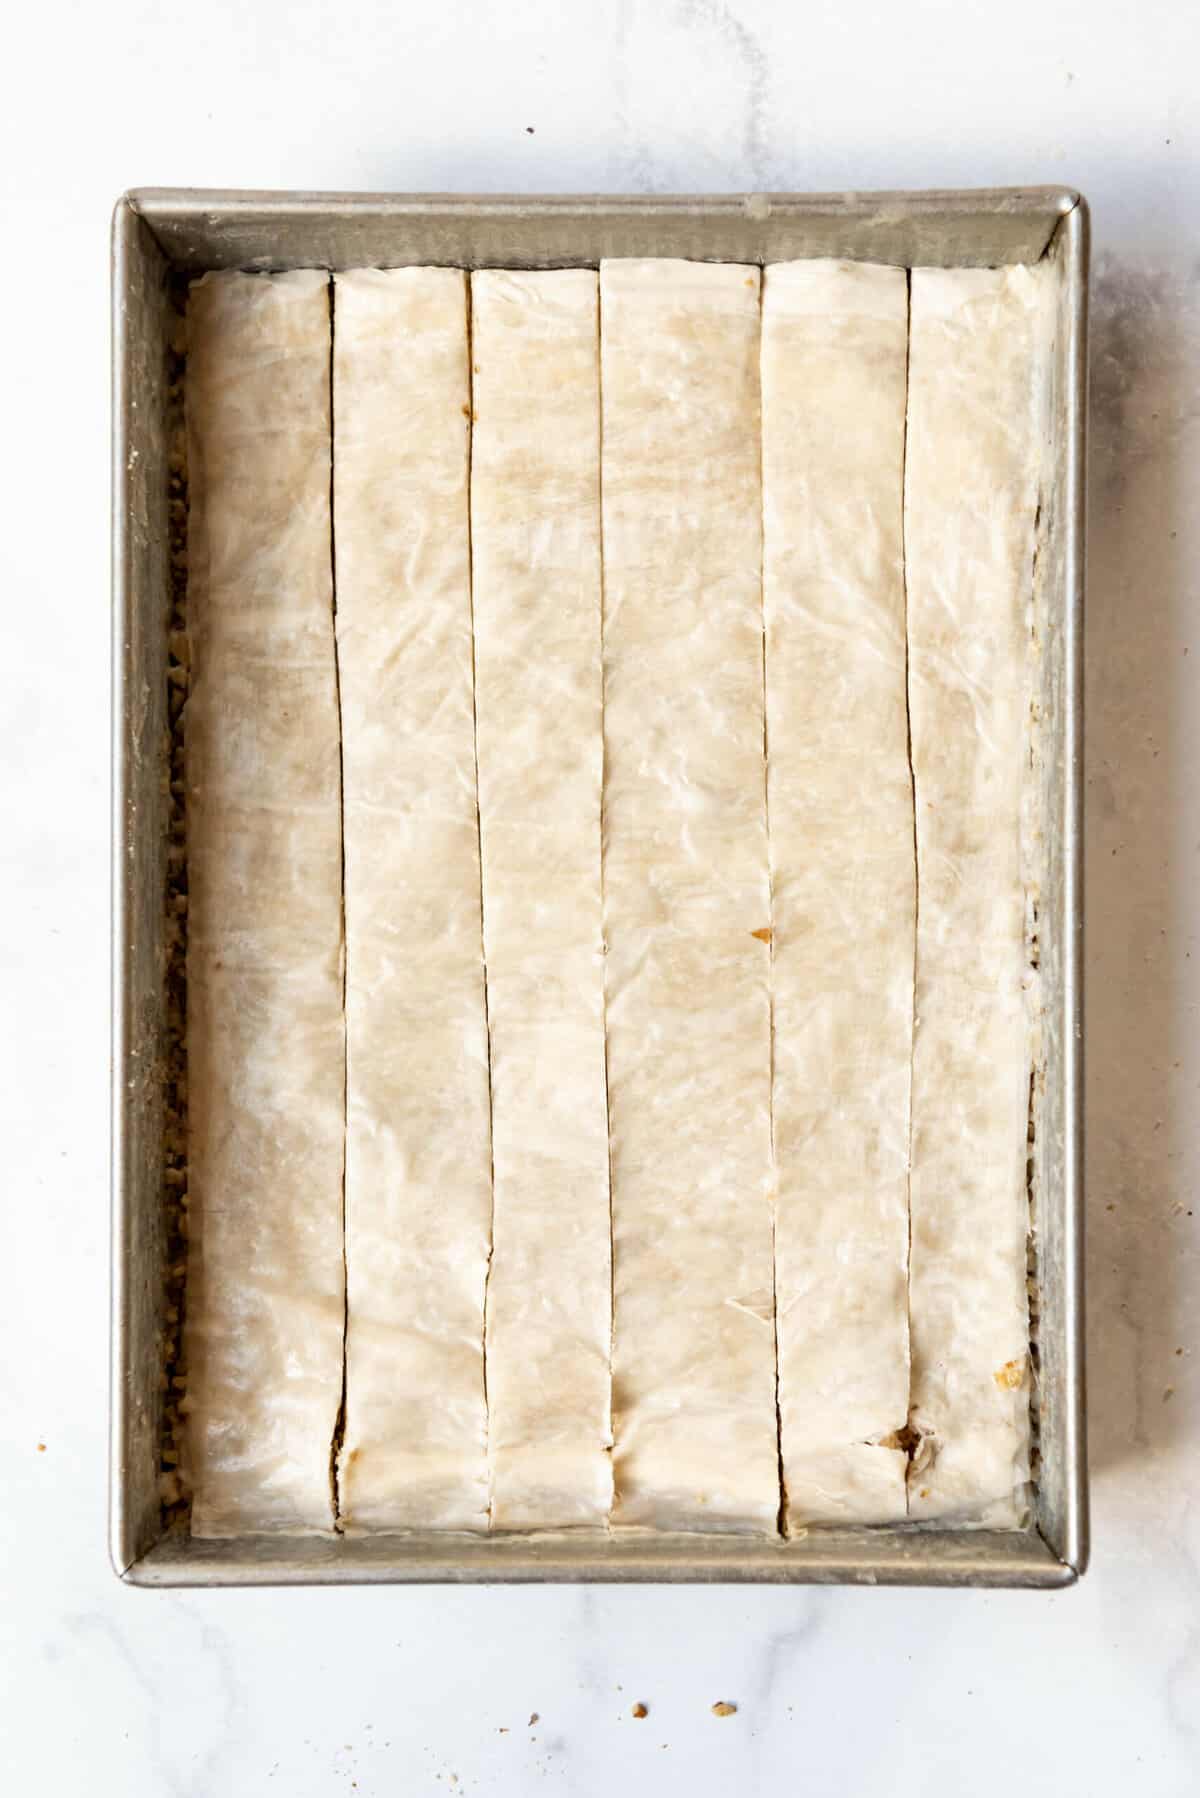 Cutting vertical lines through layers of phyllo dough and nuts.